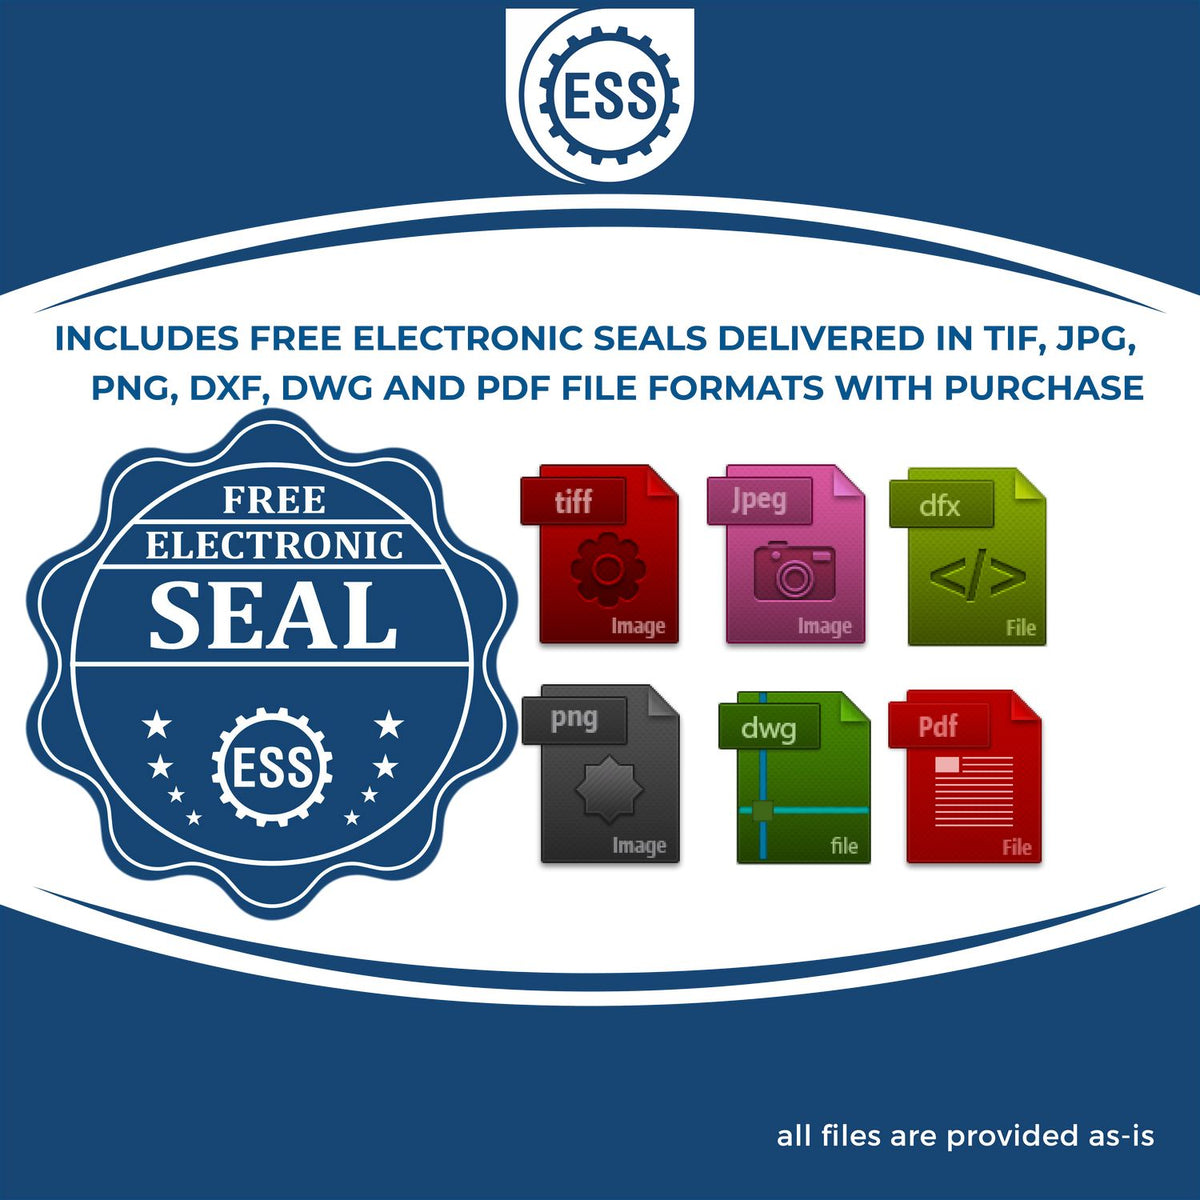 An infographic for the free electronic seal for the Heavy Duty Cast Iron New York Engineer Seal Embosser illustrating the different file type icons such as DXF, DWG, TIF, JPG and PNG.